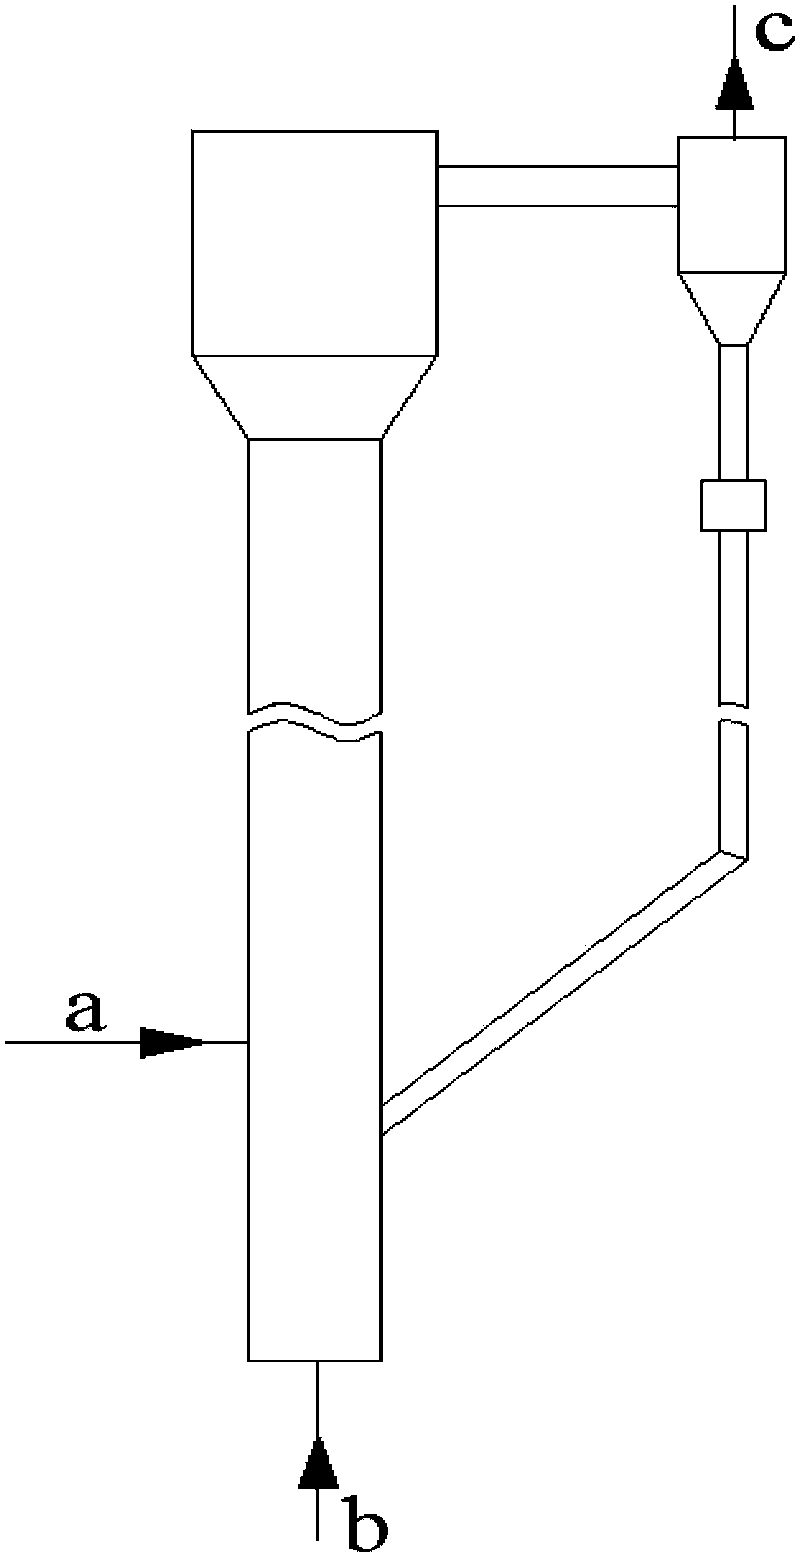 Hydrogenation method for quickly circulating fluidized silicon tetrachloride